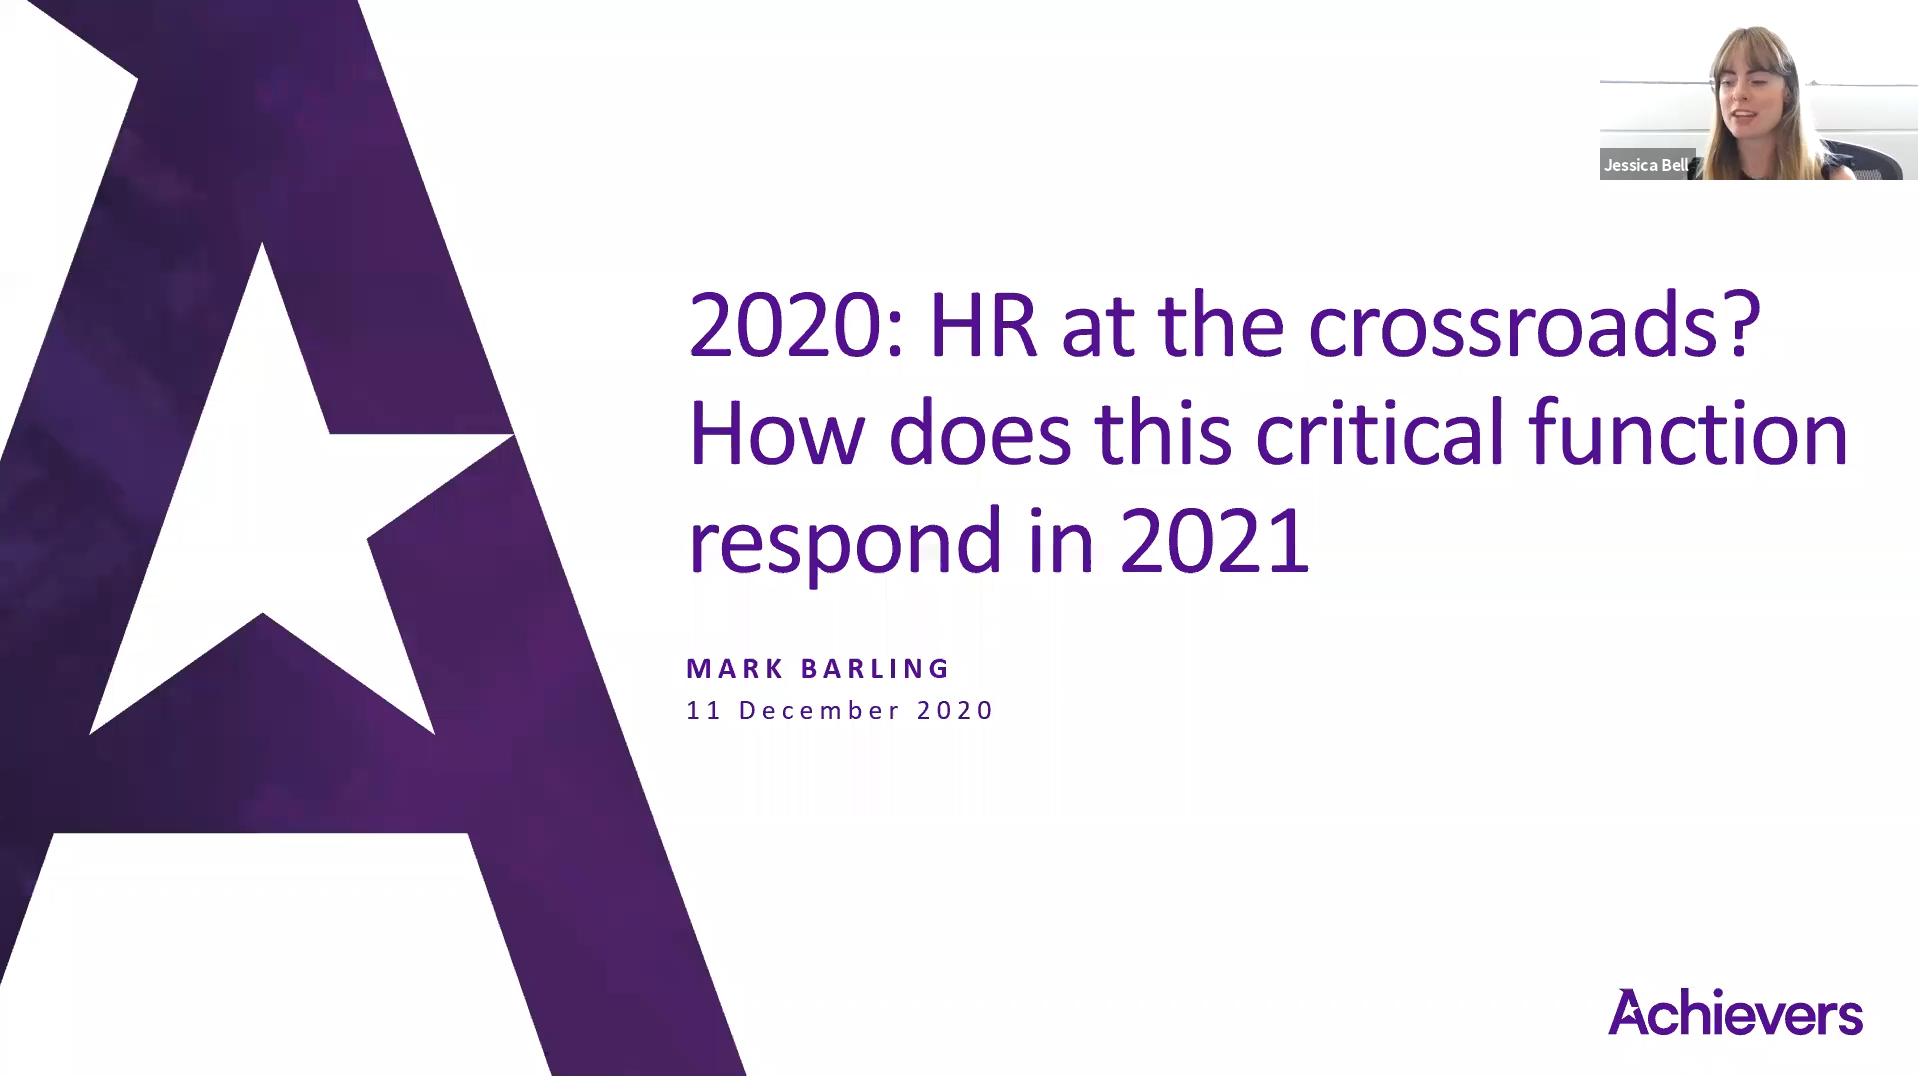 2020: HR at the crossroads? How does this critical function respond in 2021